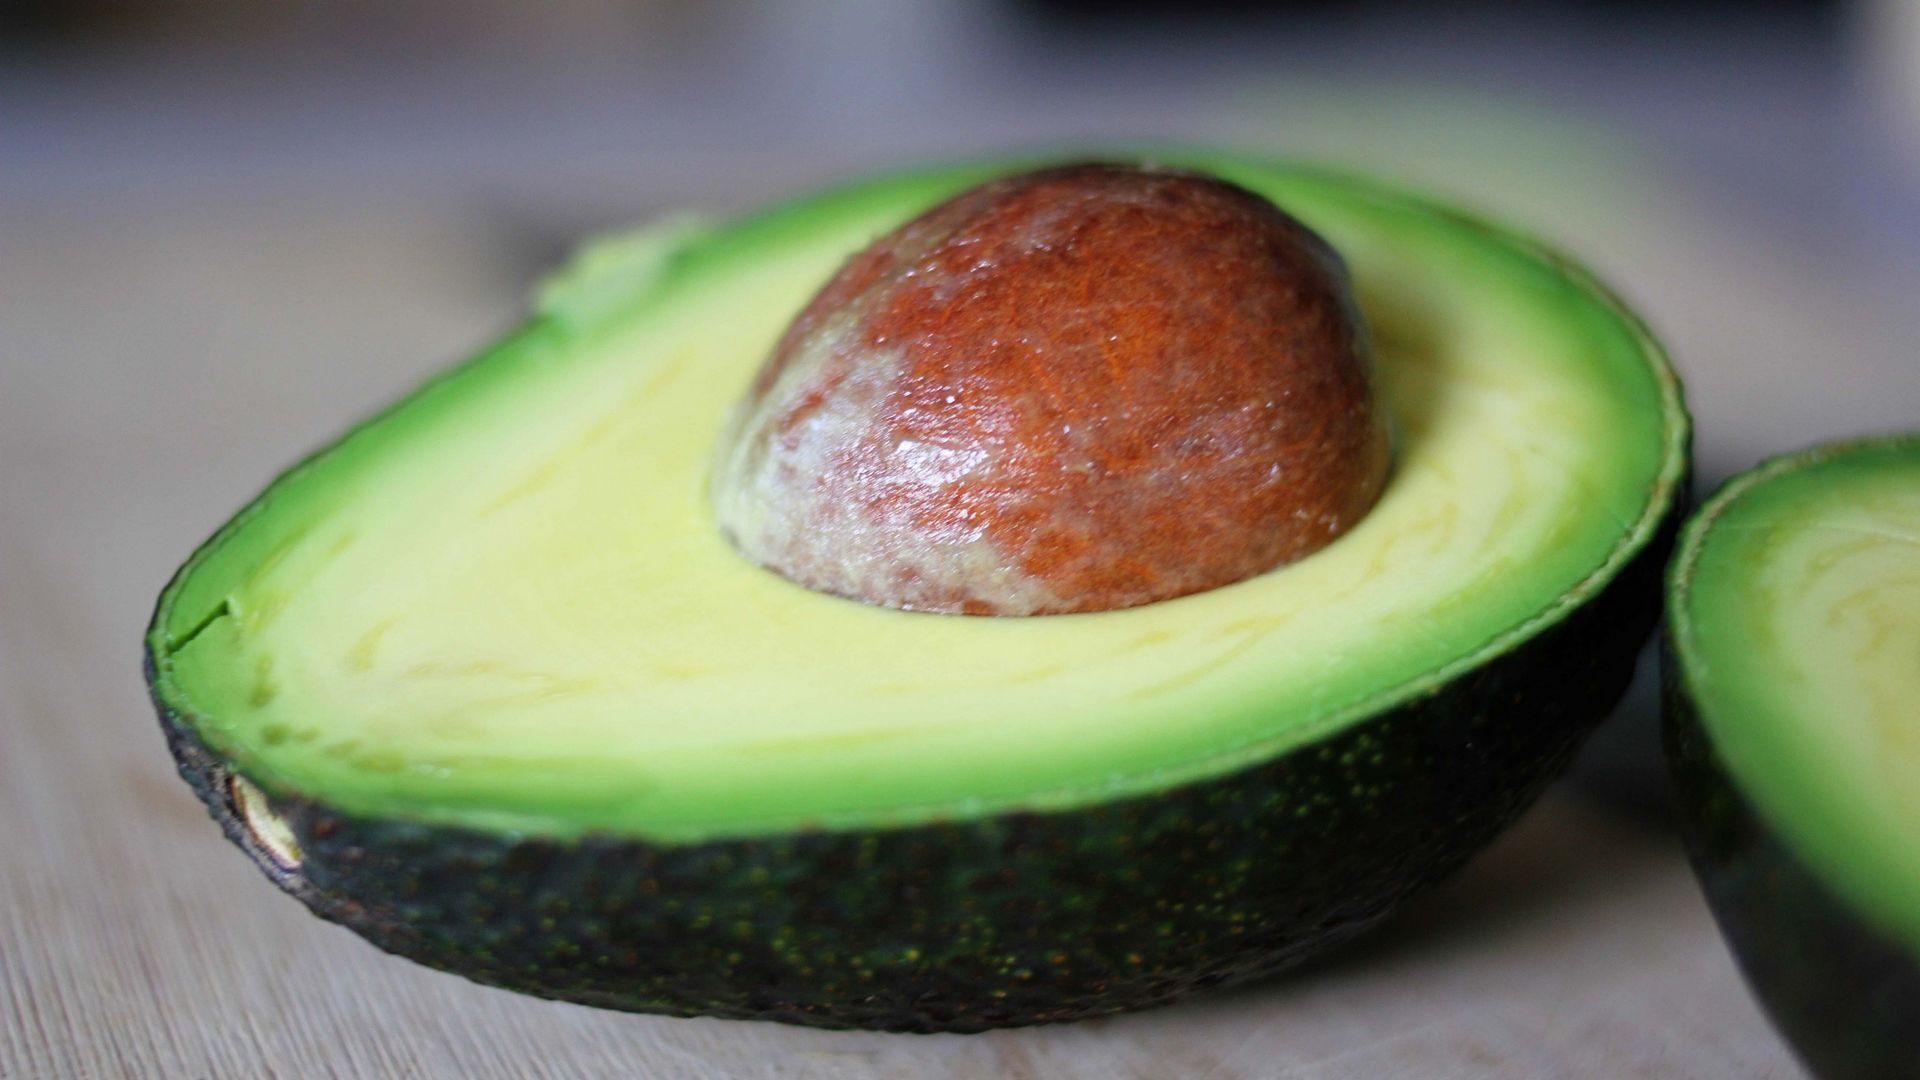 Avocado: An important part of traditional Mexican, Central American, and South American cuisine. 1920x1080 Full HD Background.